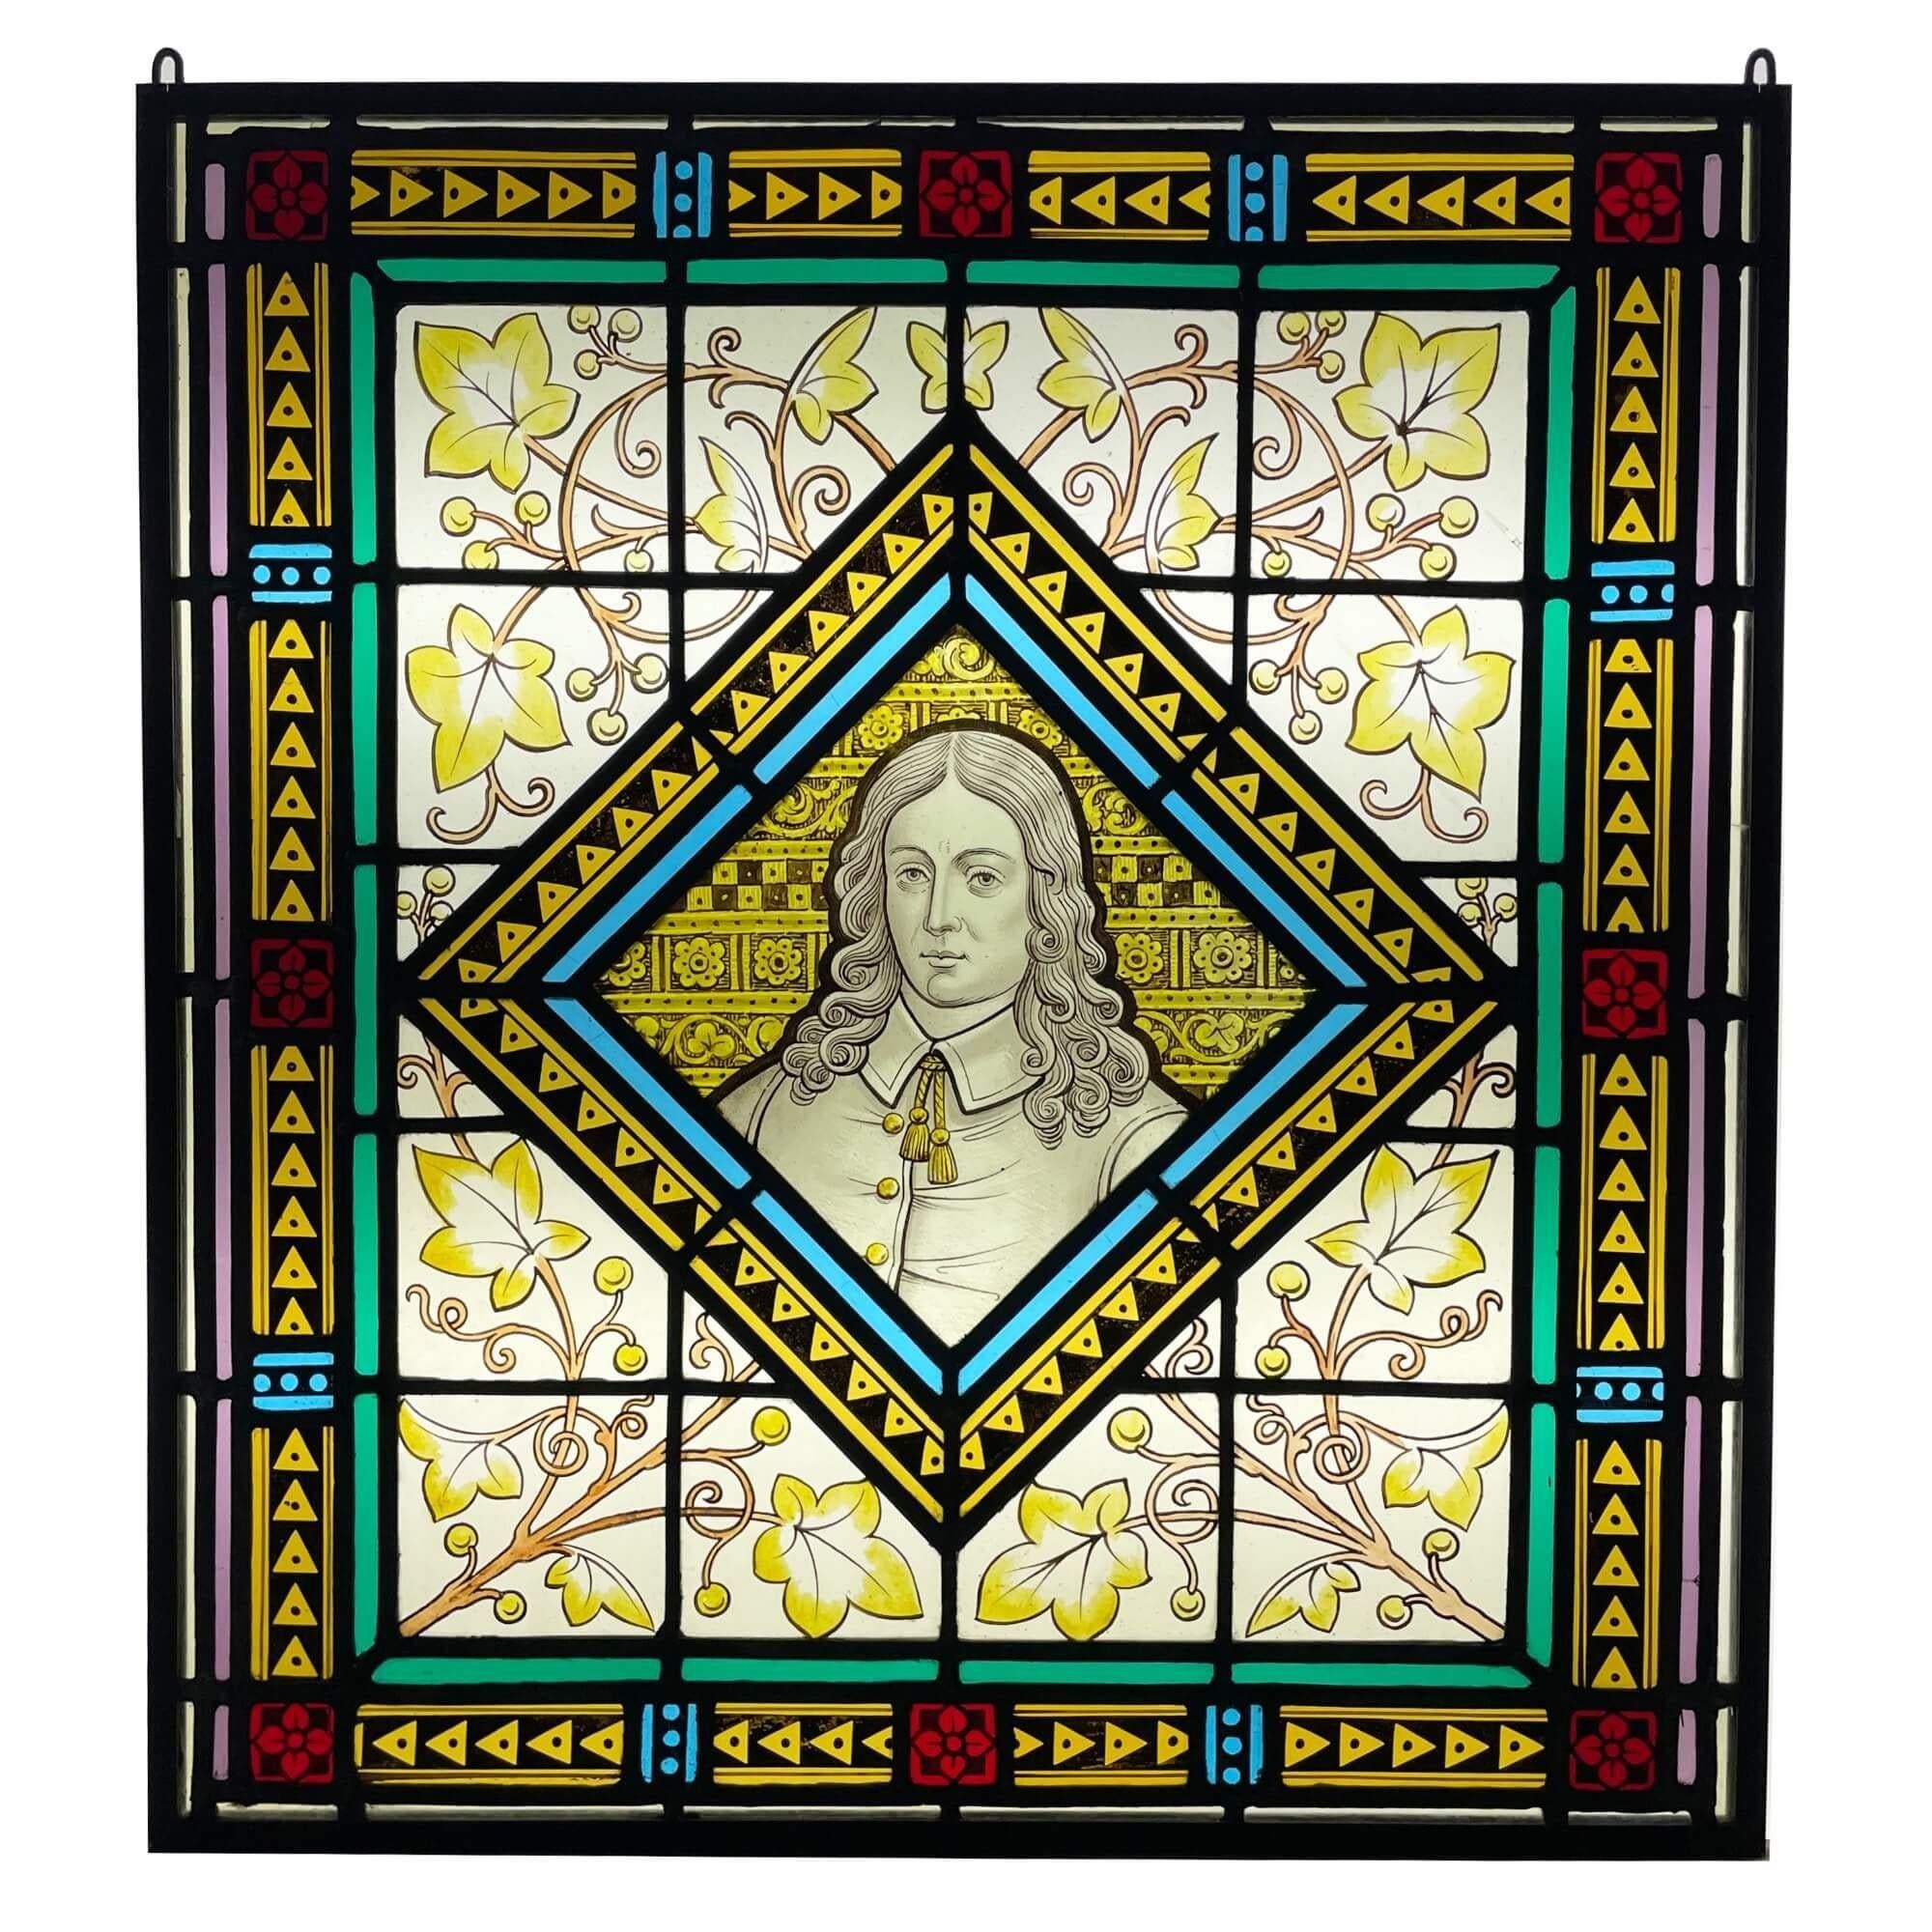 Antique Stained Glass Window Depicting a Victorian Figure In Fair Condition For Sale In Wormelow, Herefordshire